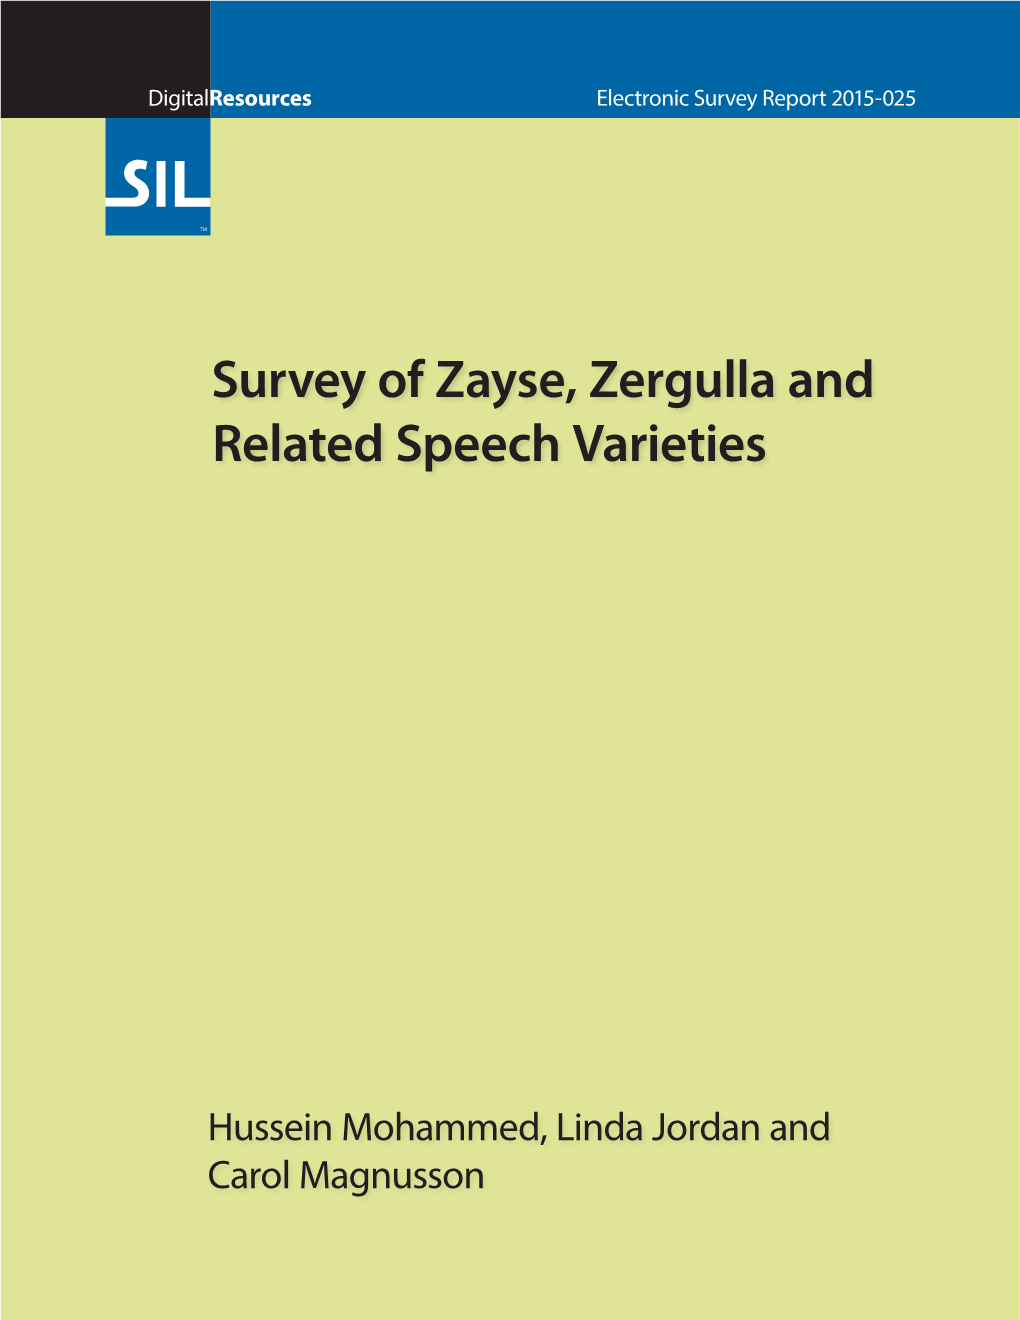 Survey of Zayse, Zergulla and Related Speech Varieties